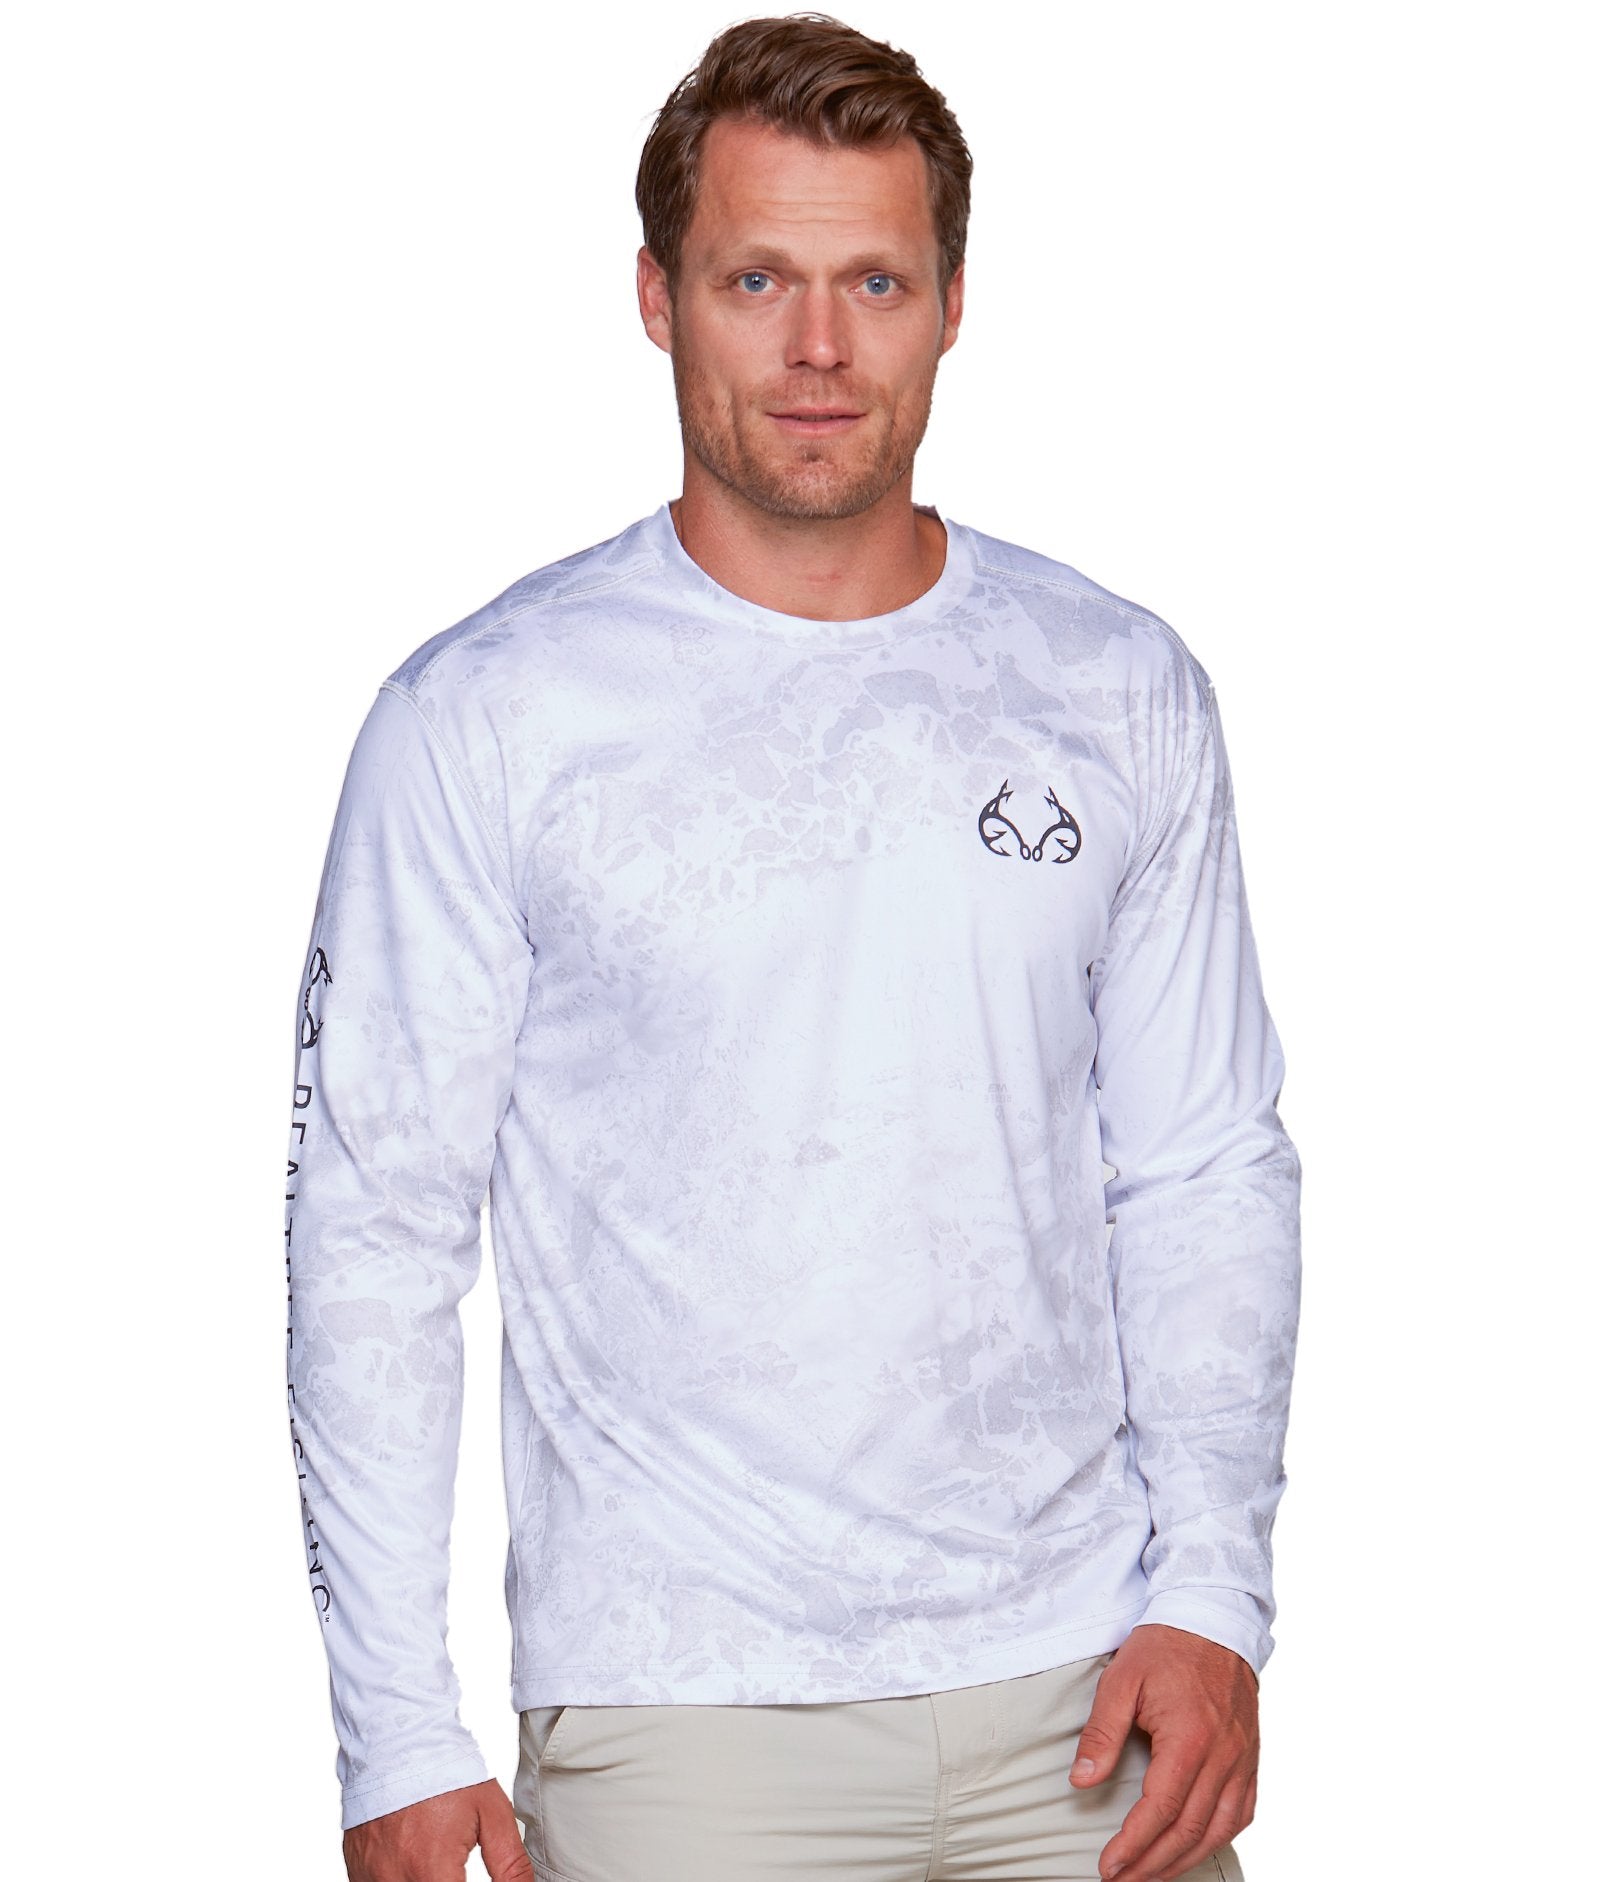 Personalized waves camo Long sleeve preformance Fishing Shirts for